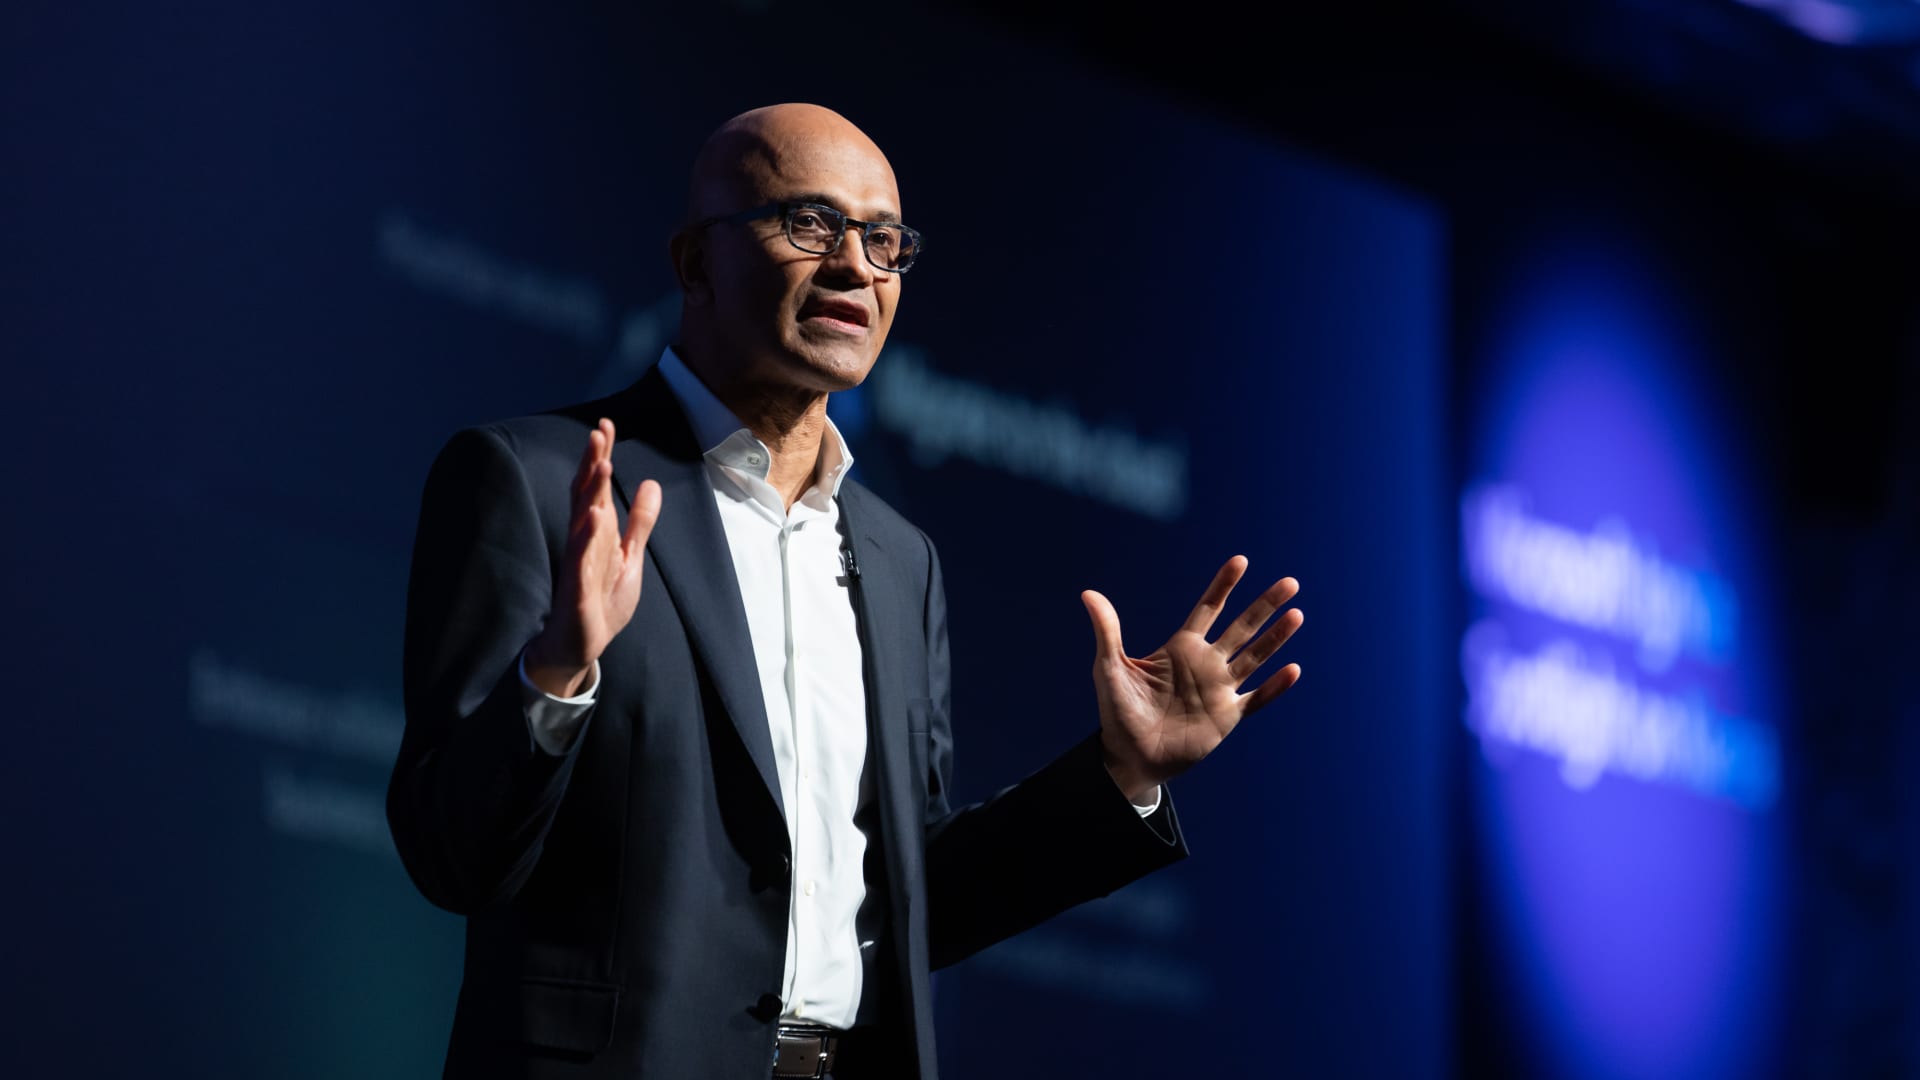 Here's how much money Google estimates Microsoft's cloud business is actually losing